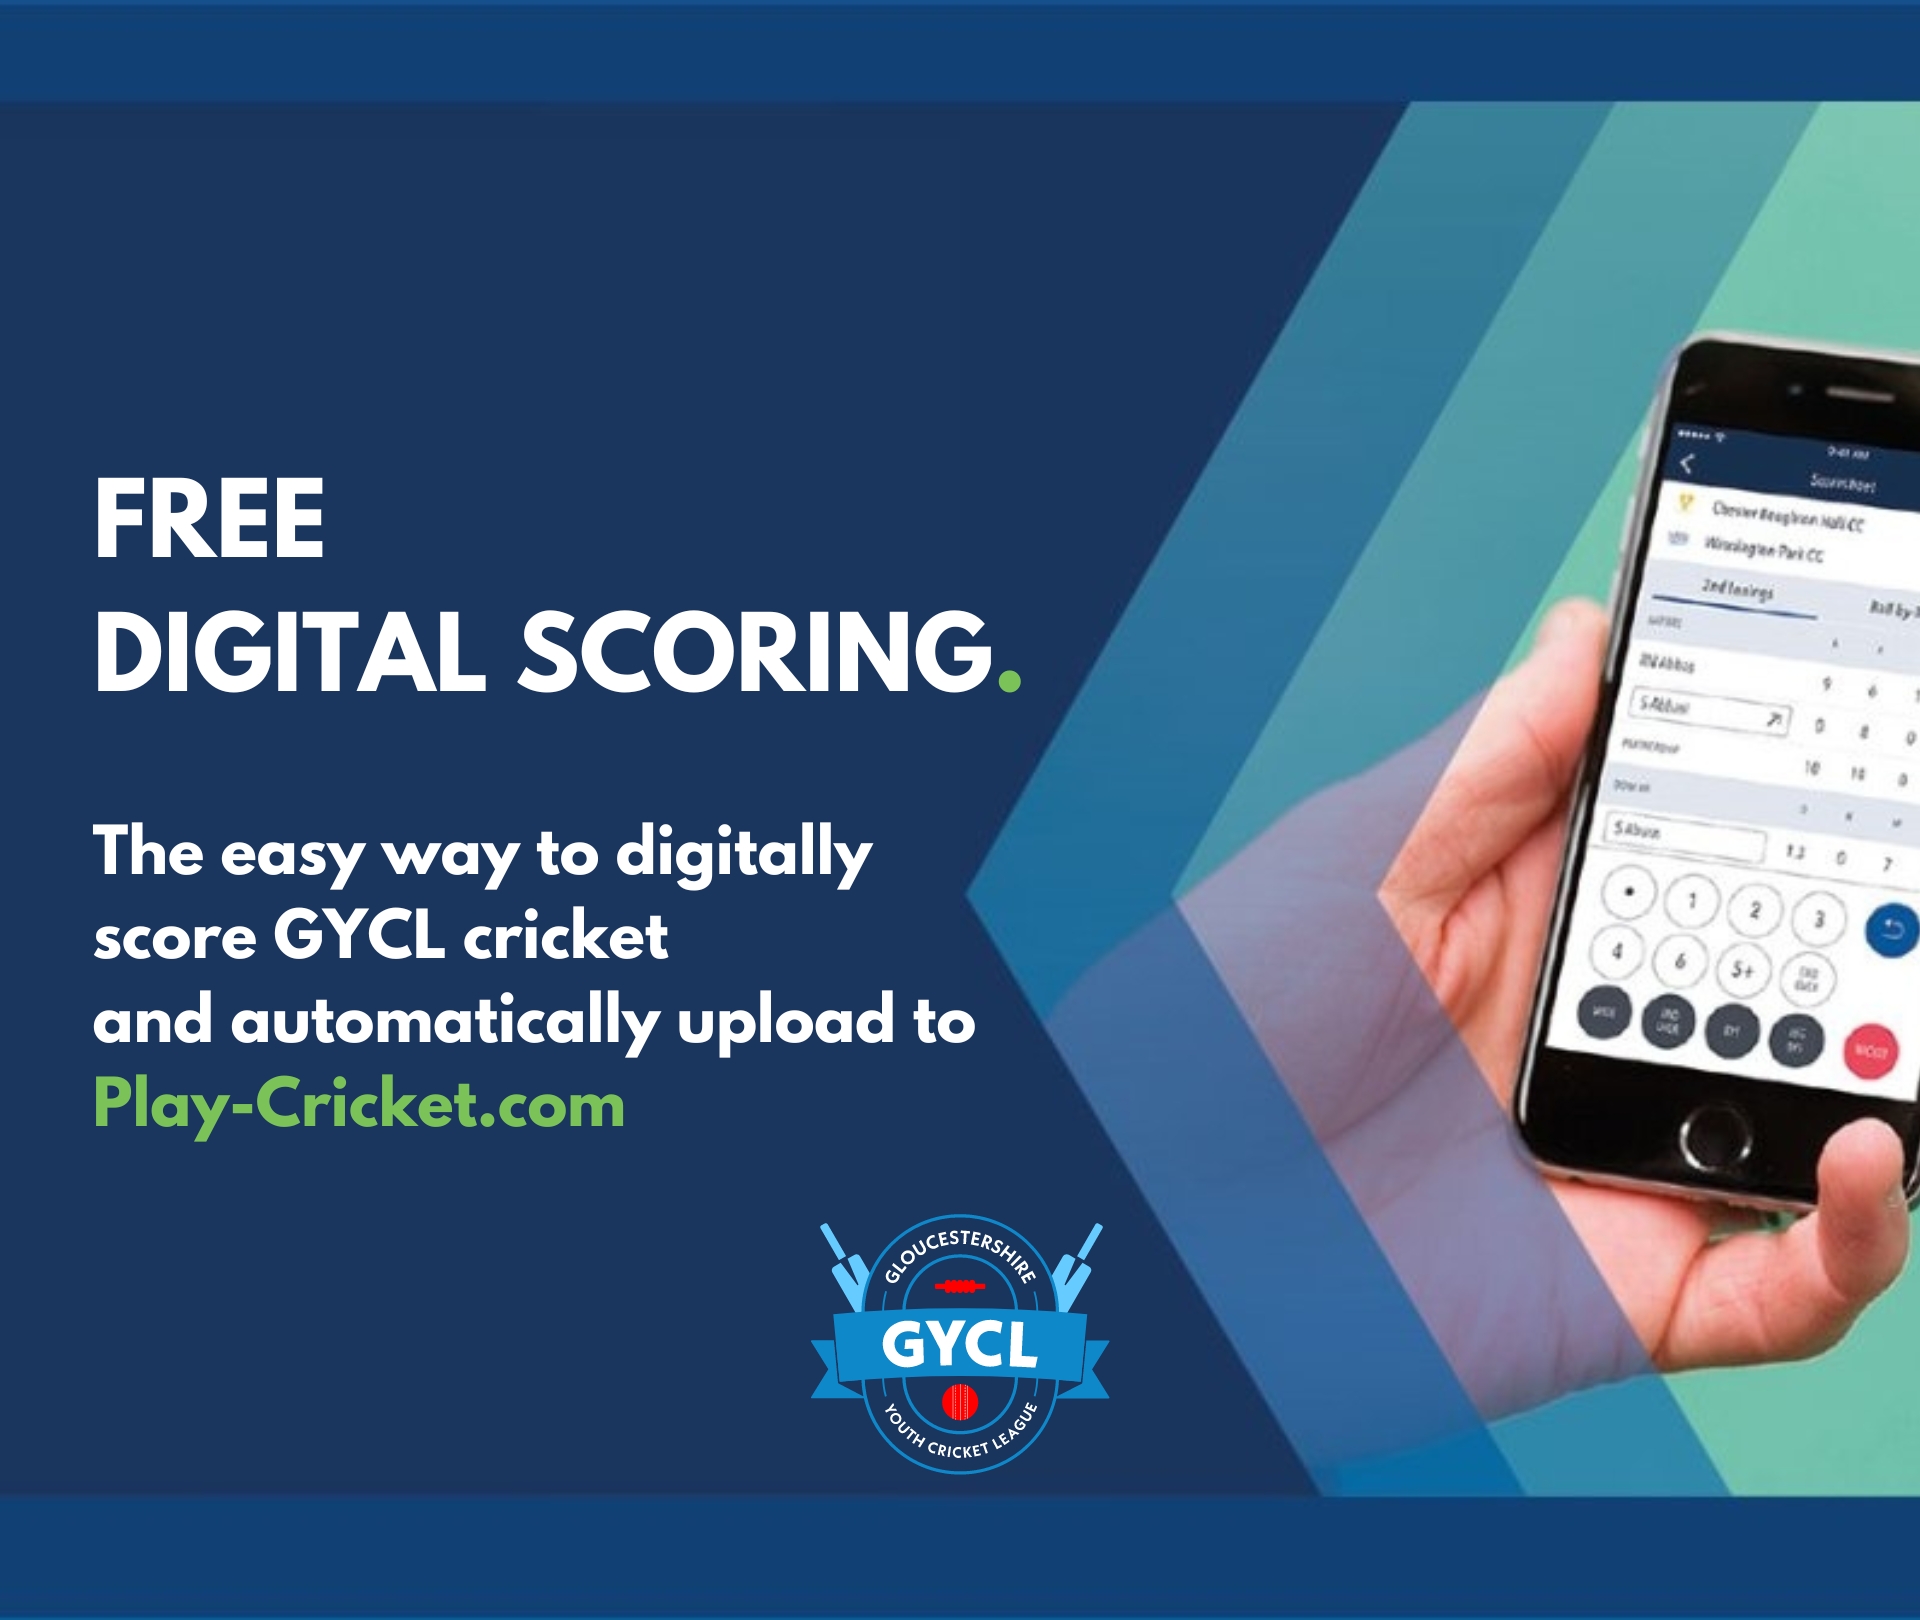 FREE DIGITAL SCORING. The easy way to digitally score GYCL cricket and automatically upload to Play-Cricket.com